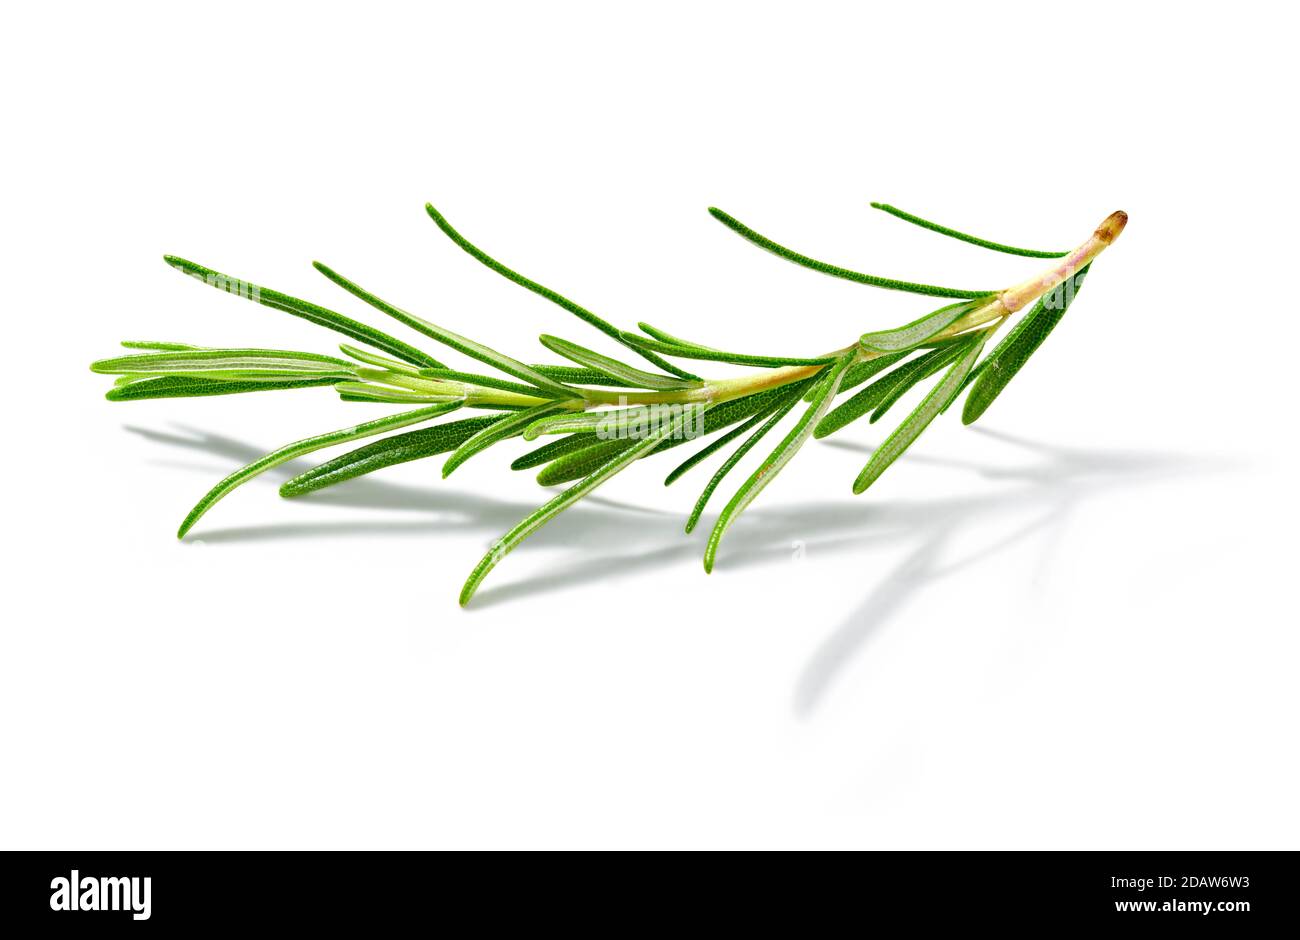 Twig of green rosemary, resting on white background, with shadows. Stock Photo